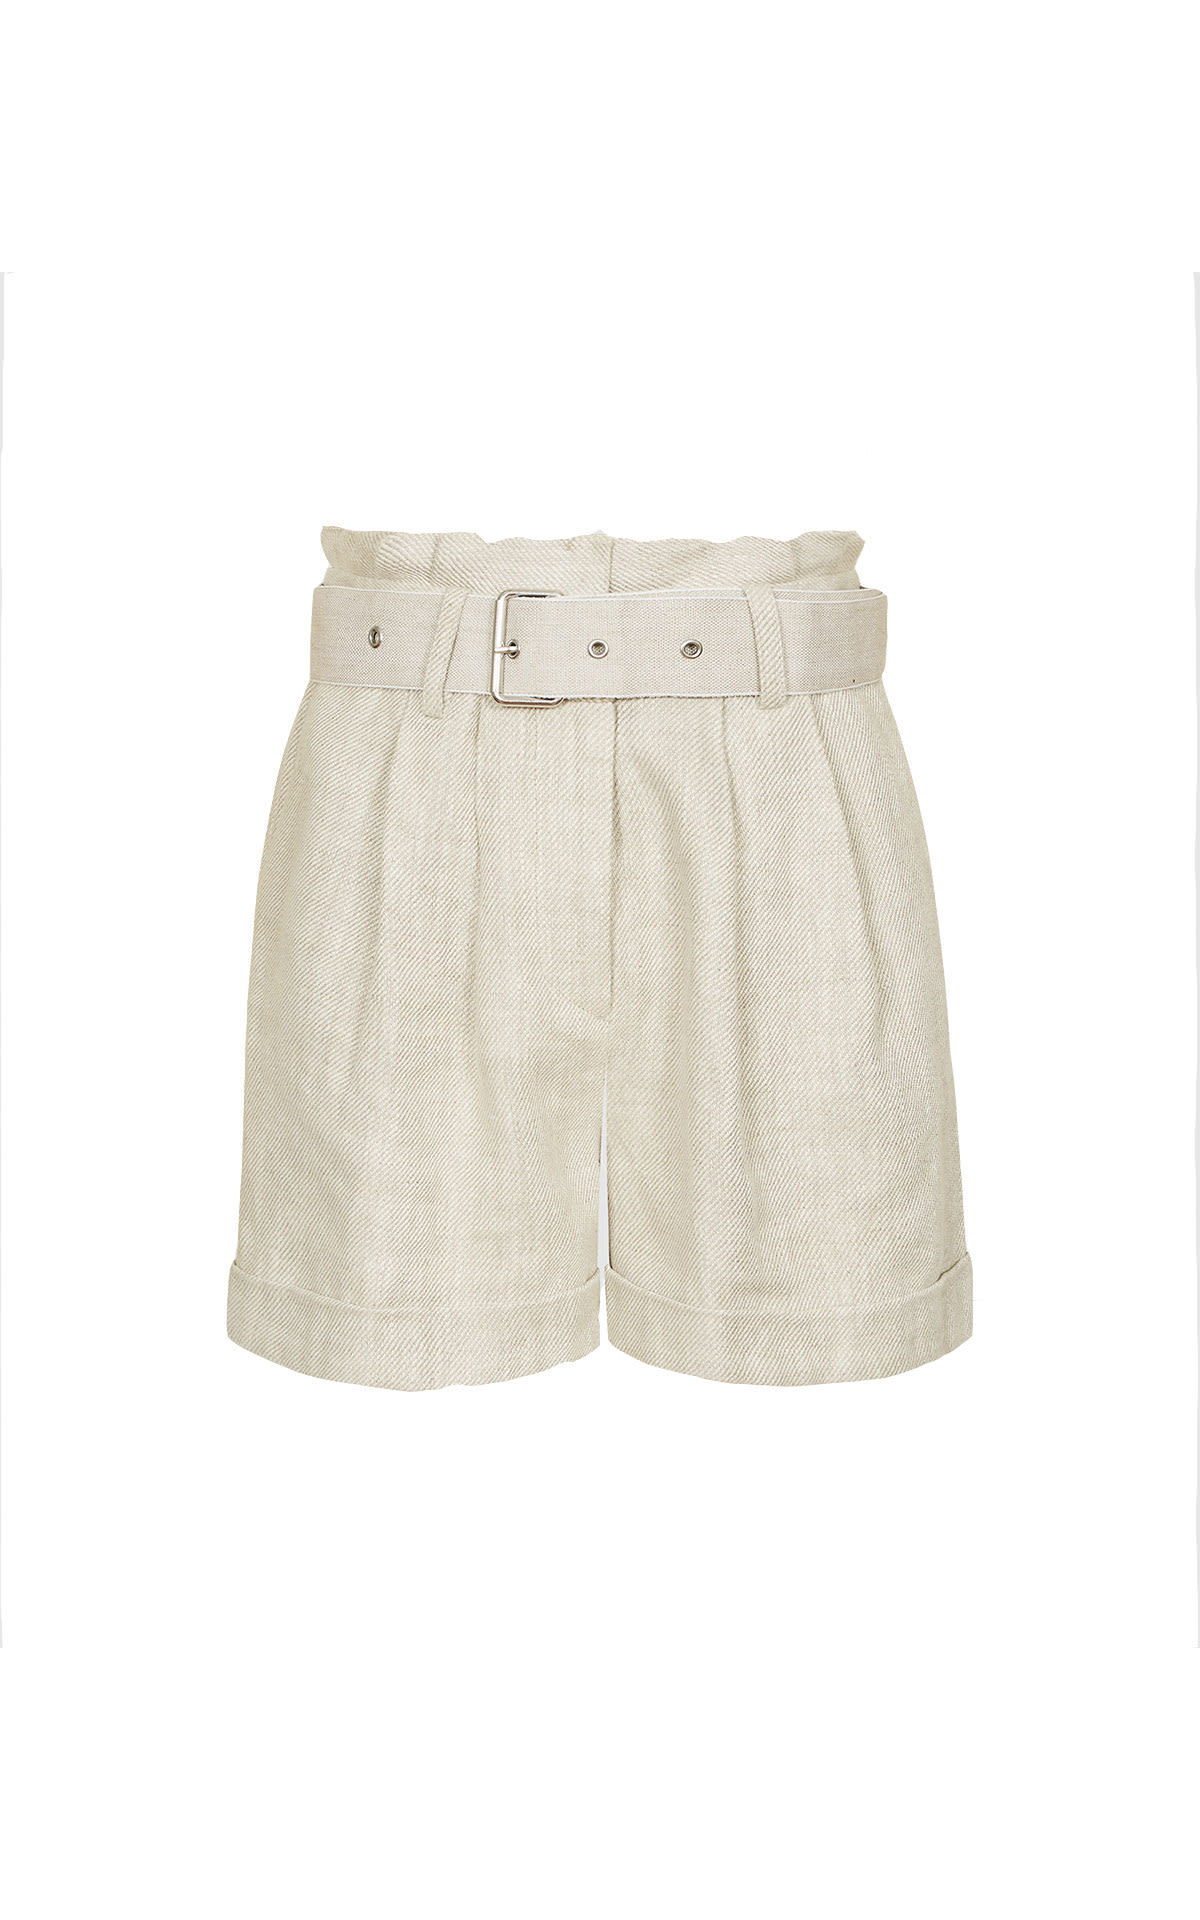 Reiss Romy neutral shorts from Bicester Village